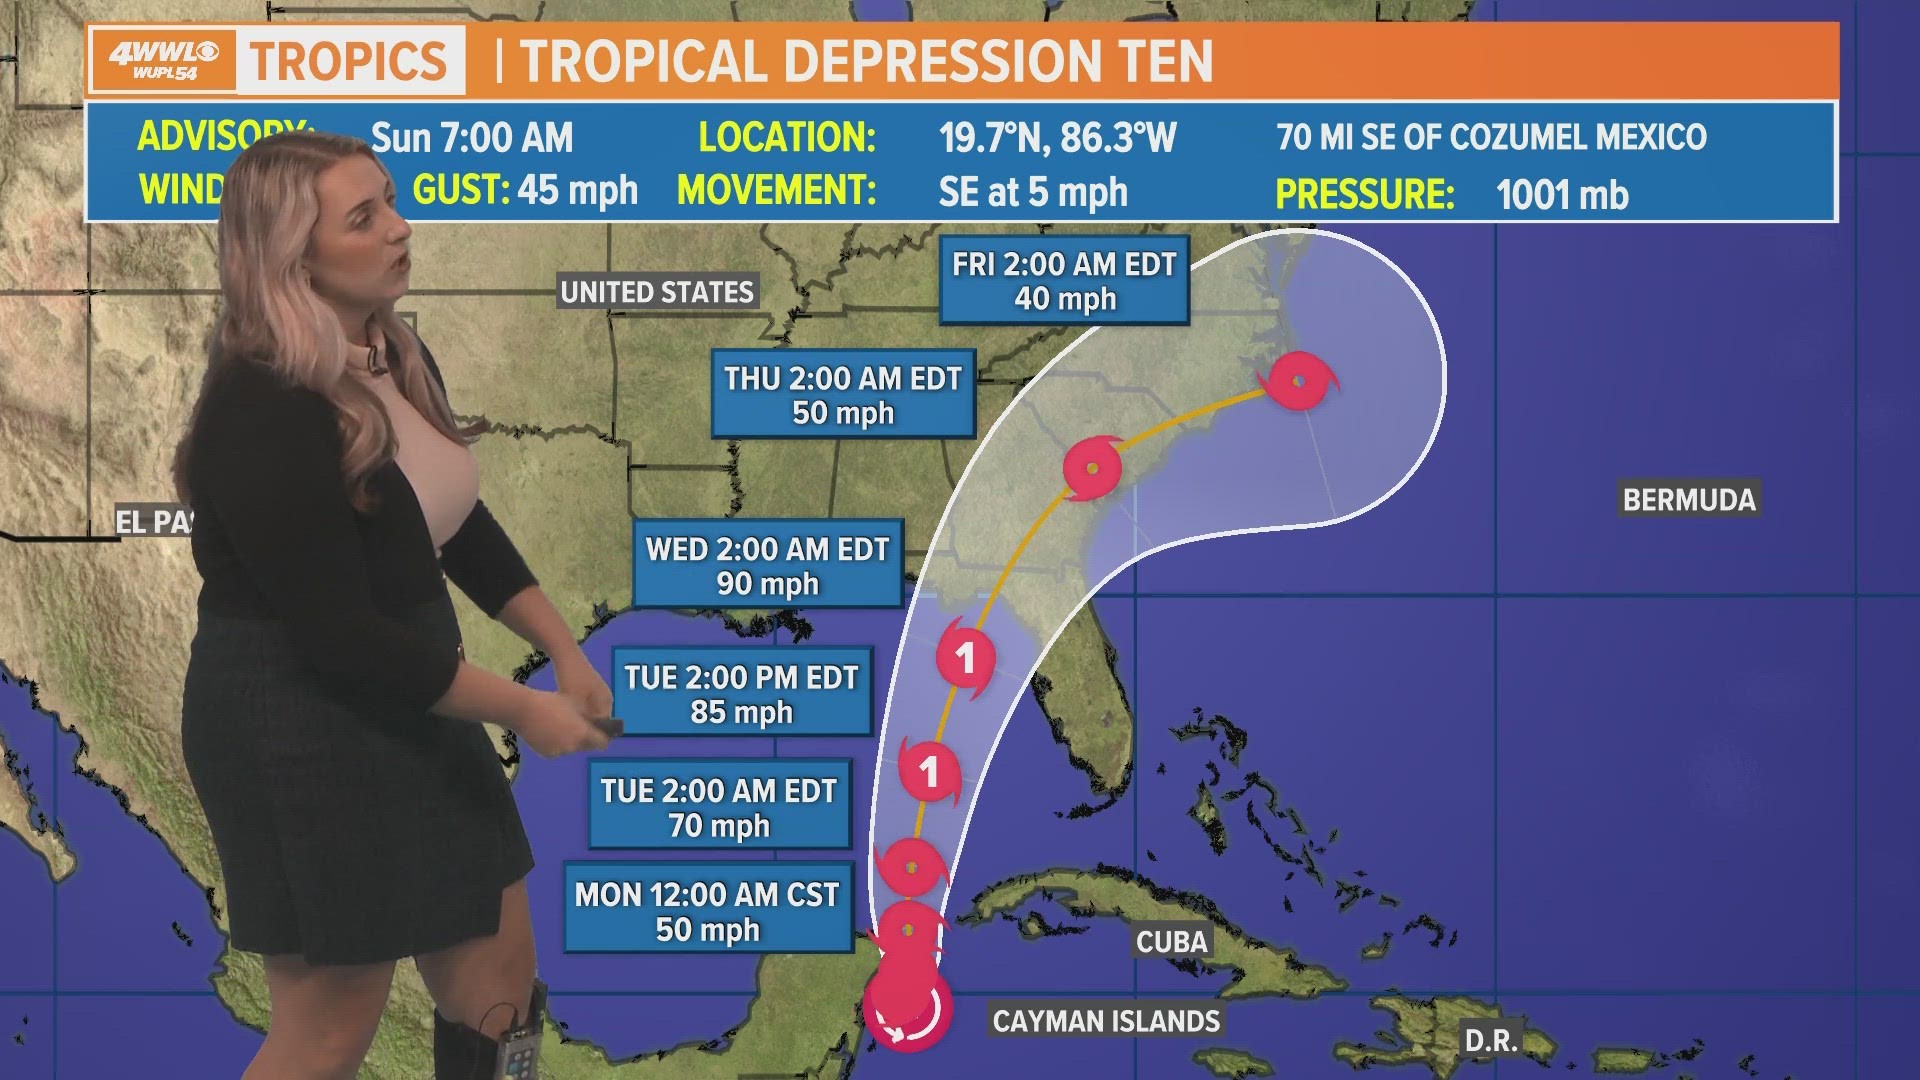 The new depression's forecast path is toward Florida's Big Bend area by early Wednesday possibly as a hurricane.